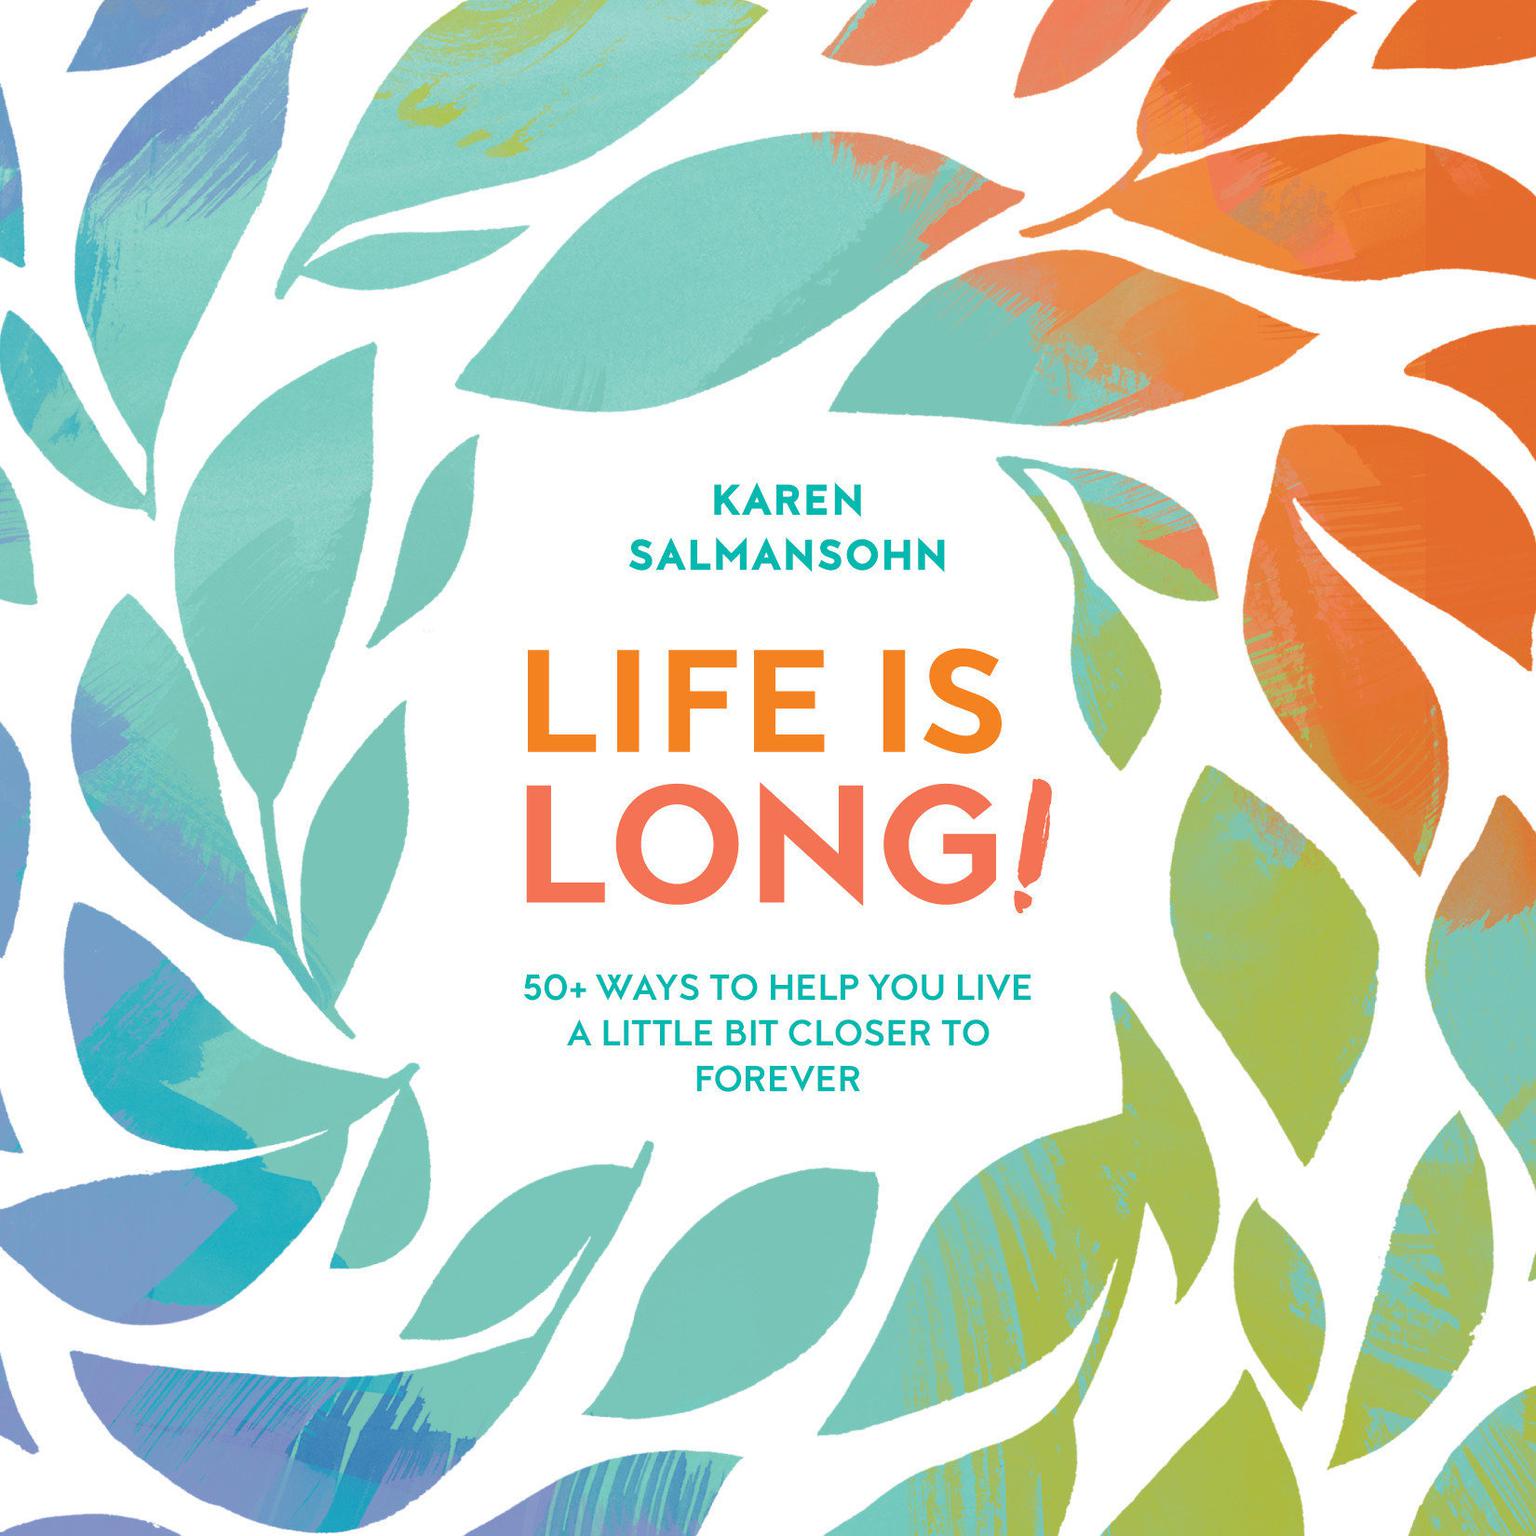 Life Is Long!: 50+ Ways to Help You Live a Little Bit Closer to Forever Audiobook, by Karen Salmansohn